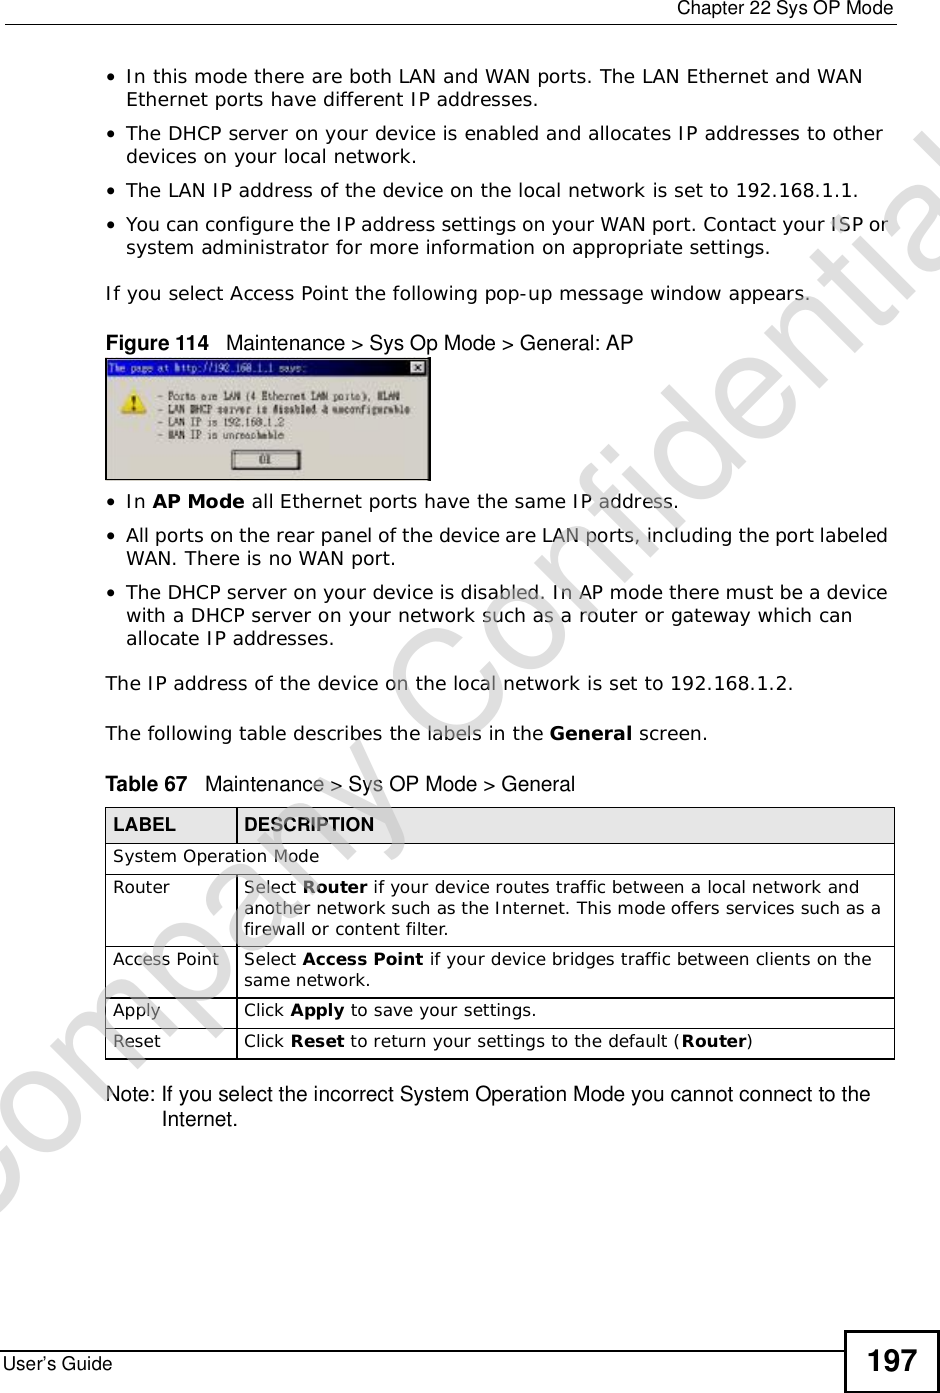  Chapter 22Sys OP ModeUser’s Guide 197•In this mode there are both LAN and WAN ports. The LAN Ethernet and WAN Ethernet ports have different IP addresses. •The DHCP server on your device is enabled and allocates IP addresses to other devices on your local network. •The LAN IP address of the device on the local network is set to 192.168.1.1.•You can configure the IP address settings on your WAN port. Contact your ISP or system administrator for more information on appropriate settings.If you select Access Point the following pop-up message window appears.Figure 114   Maintenance &gt; Sys Op Mode &gt; General: AP •In AP Mode all Ethernet ports have the same IP address. •All ports on the rear panel of the device are LAN ports, including the port labeled WAN. There is no WAN port.•The DHCP server on your device is disabled. In AP mode there must be a device with a DHCP server on your network such as a router or gateway which can allocate IP addresses.The IP address of the device on the local network is set to 192.168.1.2.The following table describes the labels in the General screen.Table 67   Maintenance &gt; Sys OP Mode &gt; General Note: If you select the incorrect System Operation Mode you cannot connect to the Internet.LABEL DESCRIPTIONSystem Operation ModeRouter  Select Router if your device routes traffic between a local network and another network such as the Internet. This mode offers services such as a firewall or content filter.Access Point Select Access Point if your device bridges traffic between clients on the same network.Apply Click Apply to save your settings.Reset Click Reset to return your settings to the default (Router)Company Confidential